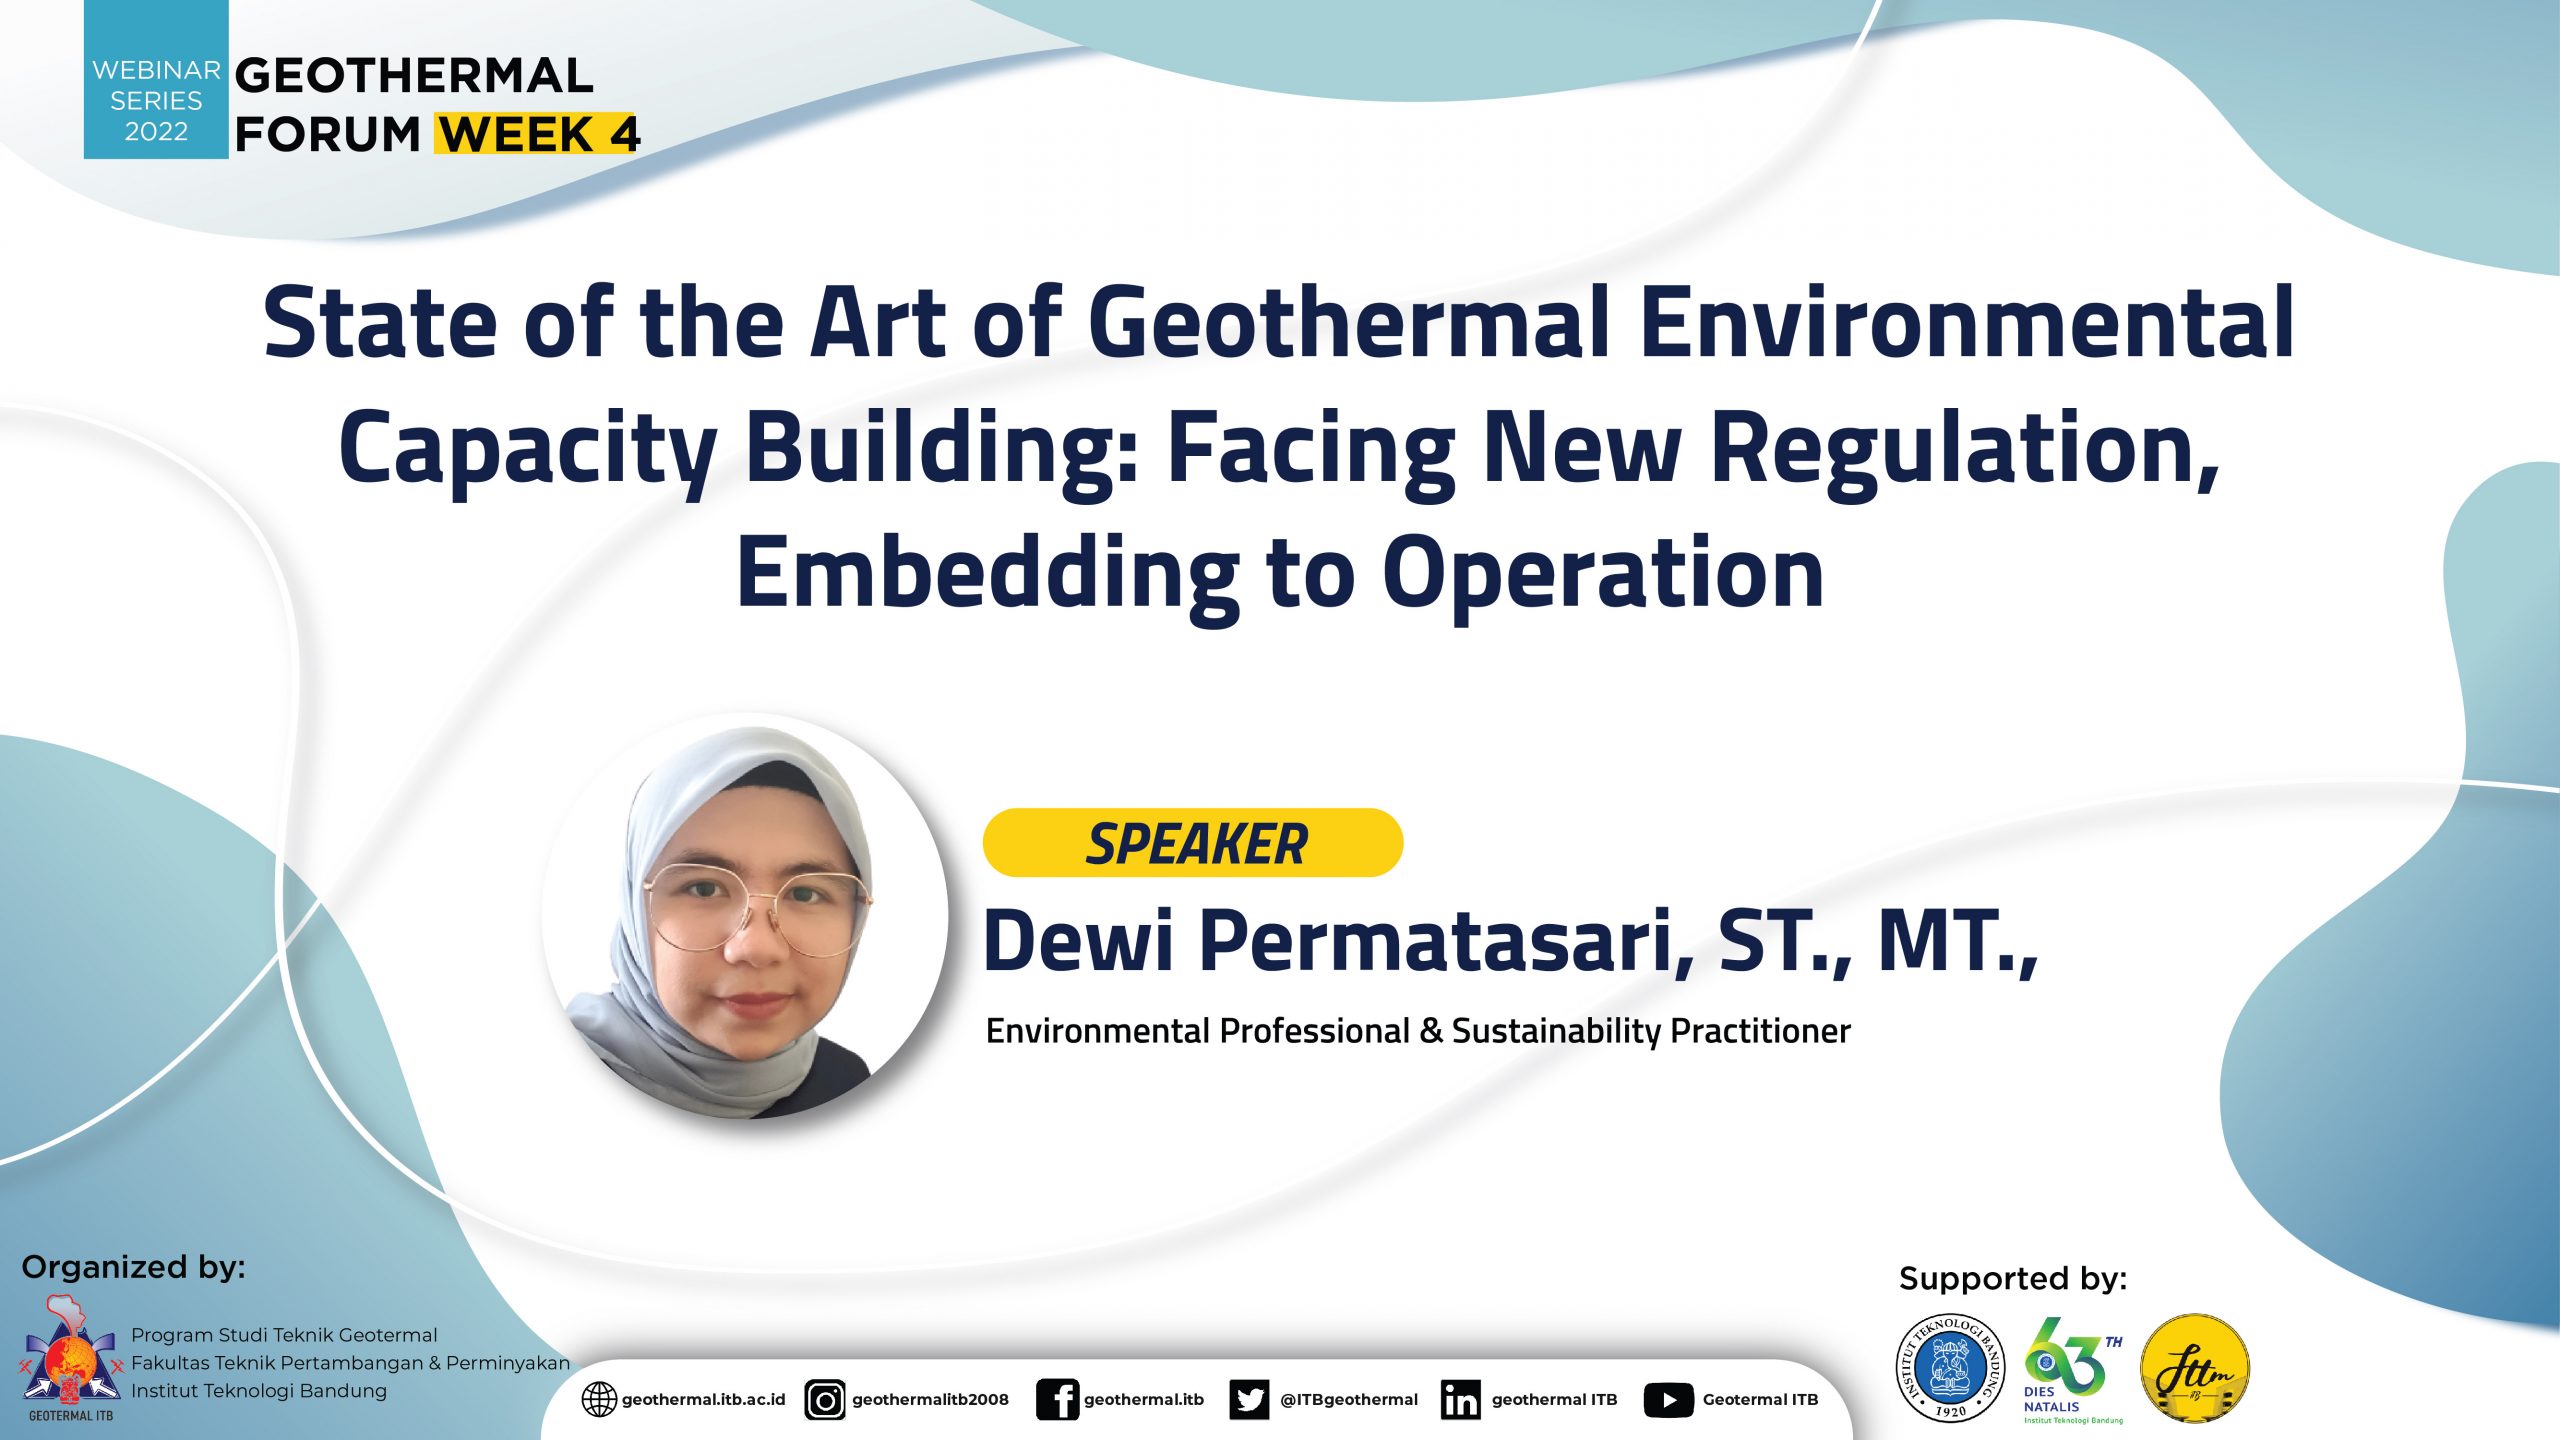 State of the art of Geothermal Environmental Capacity Building: Facing New Regulation, Embedding to Operation